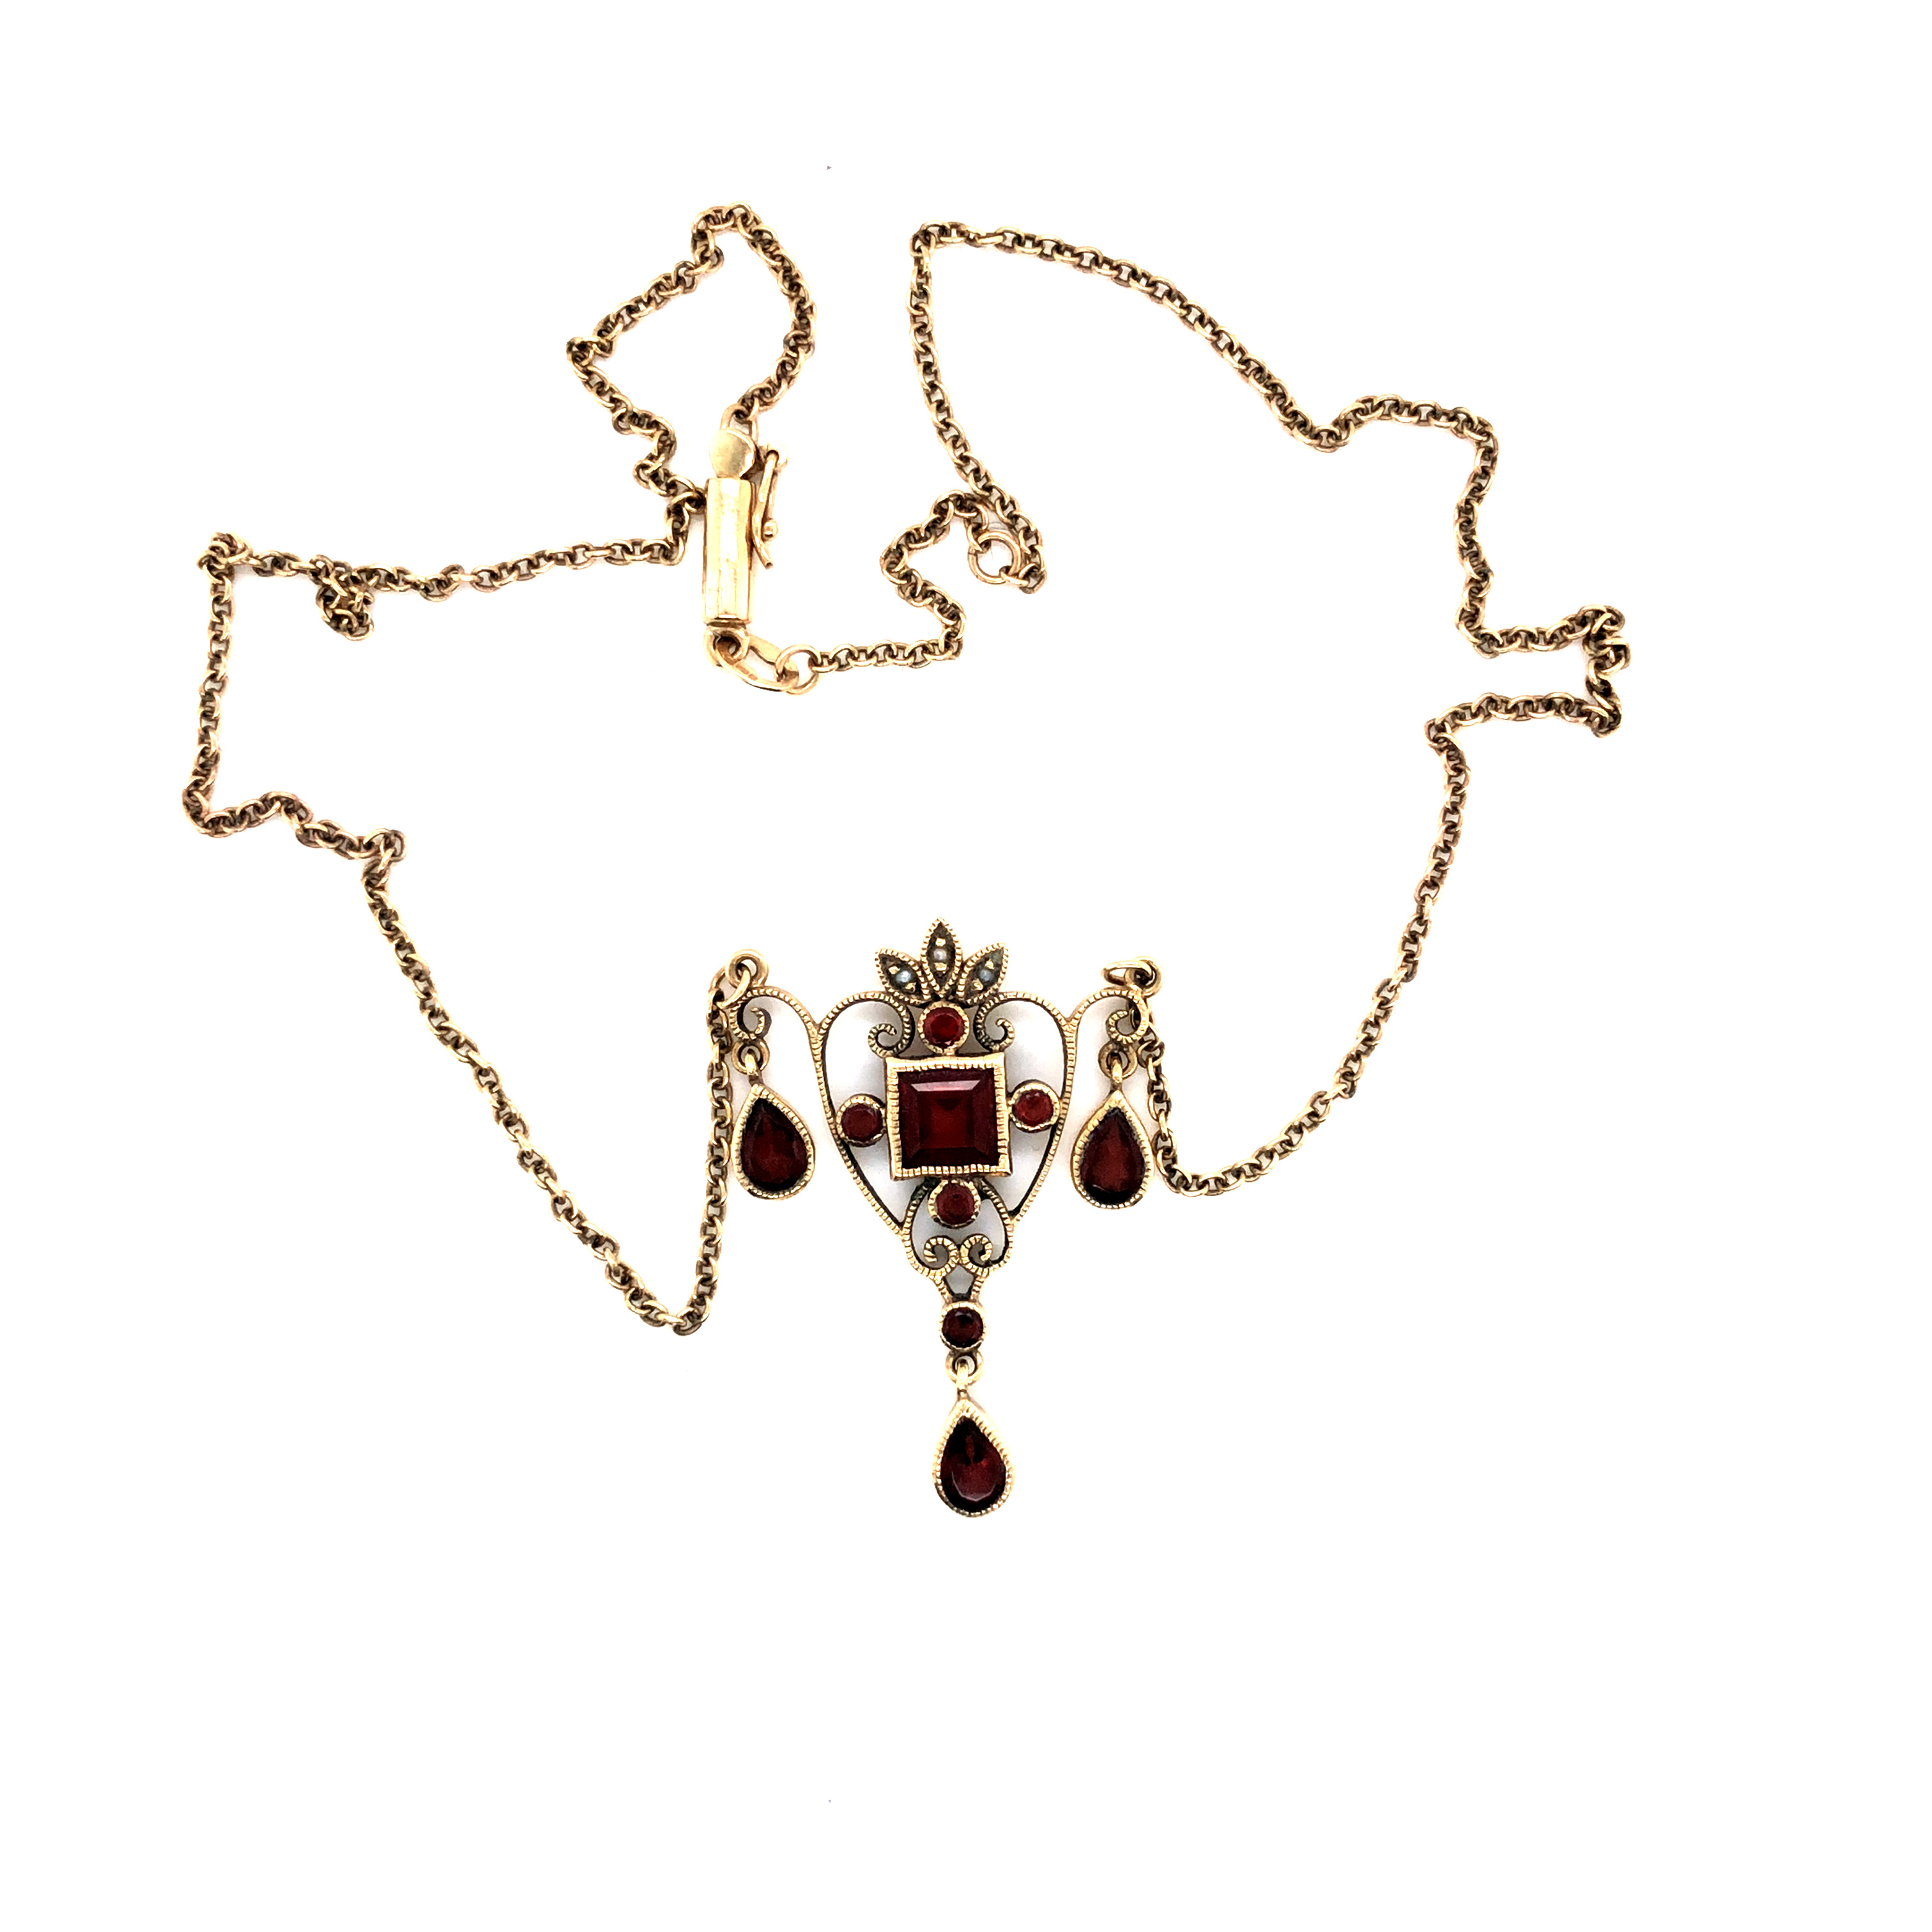 A 9ct HALLMARKED GOLD, GARNET AND SEED PEARL LAVALIERE STYLE NECKLACE. THE HEART FORM PENDANT WITH - Image 2 of 4